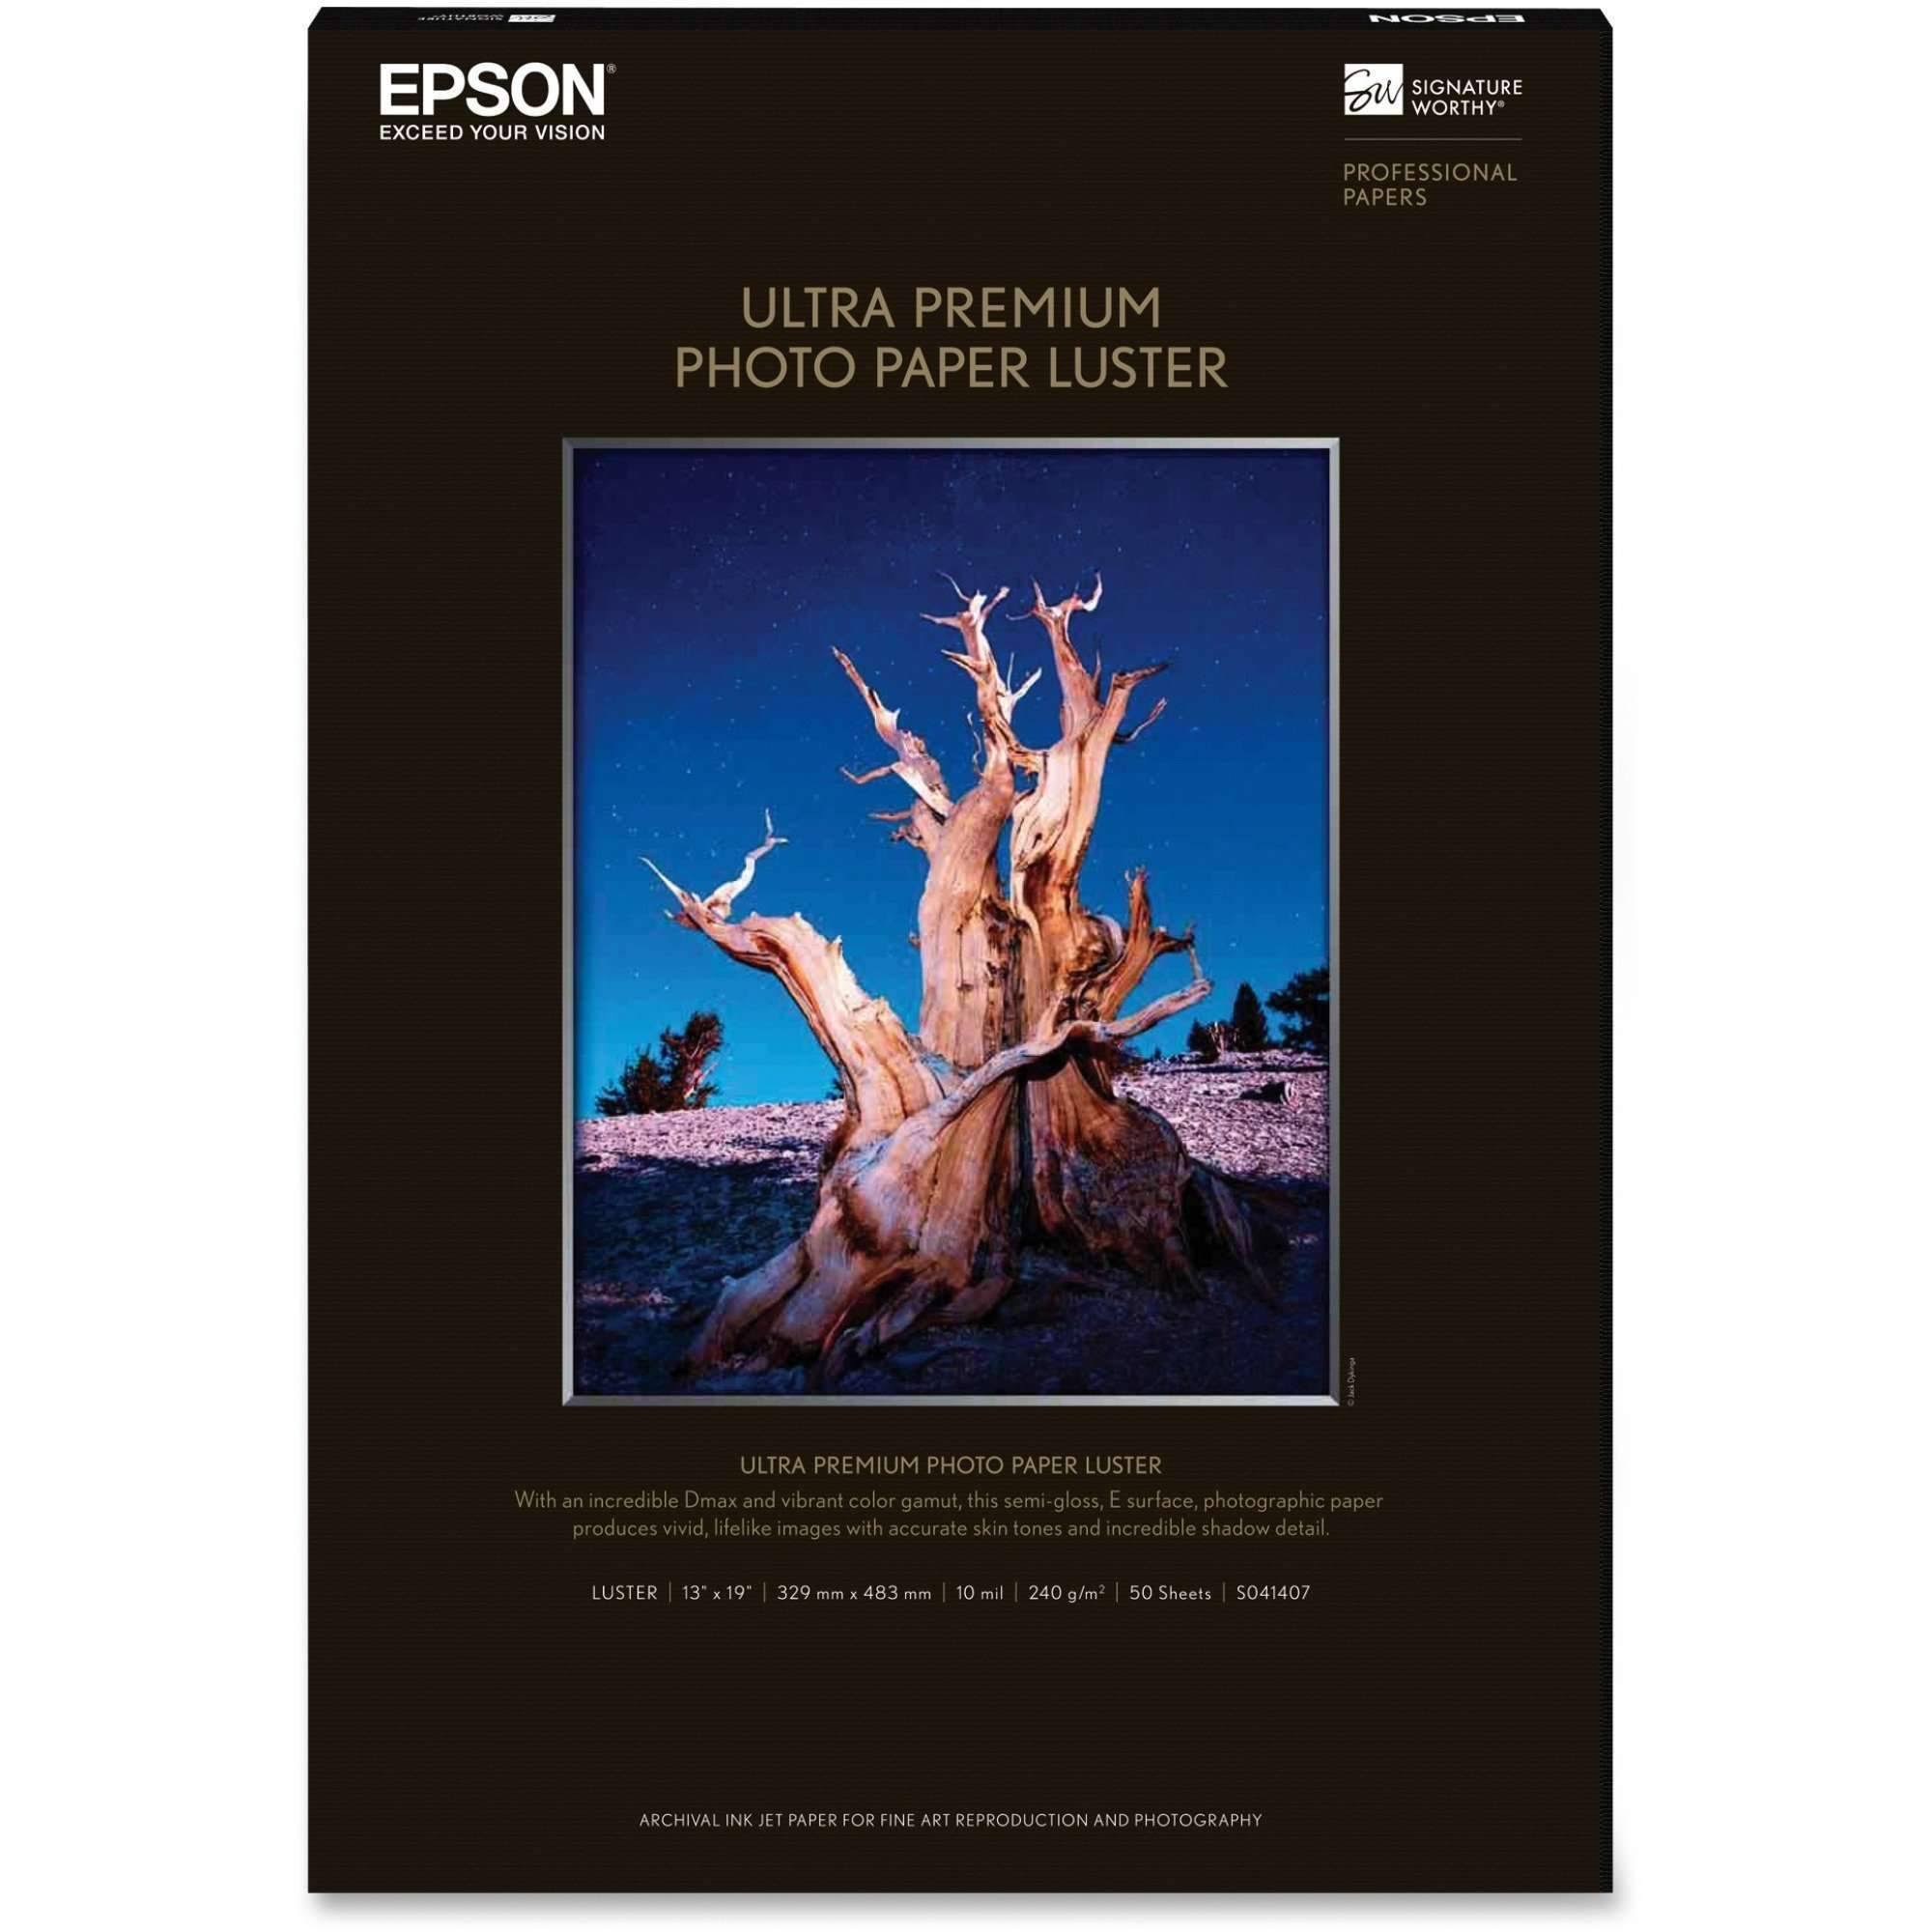 Epson Ultra Premium Photo Paper Luster - 13", 50 Sheets